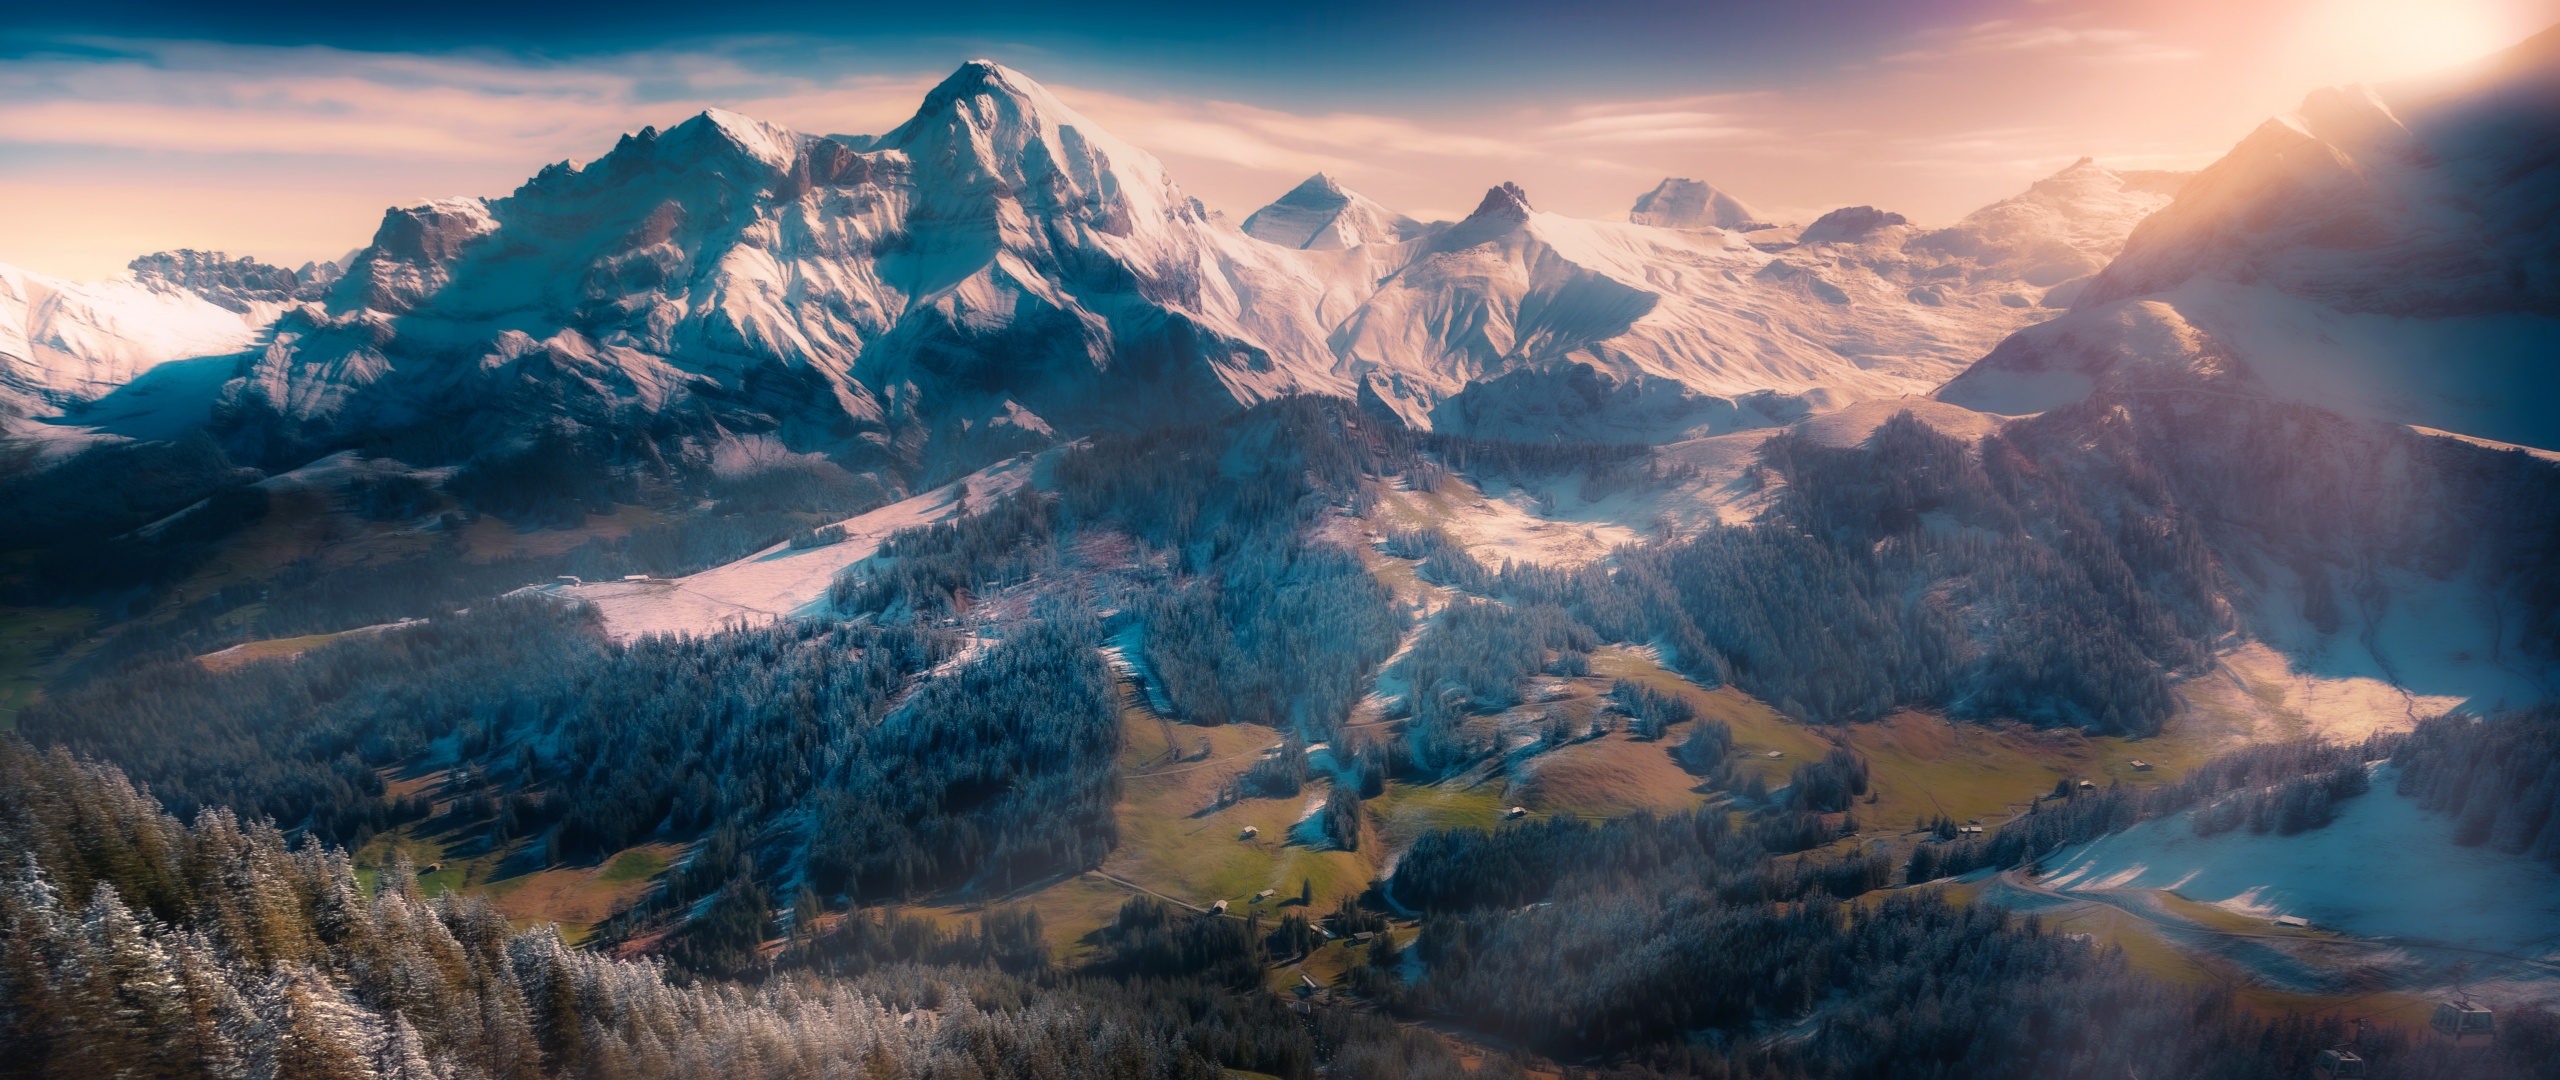 Switzerland 4K wallpapers for your desktop or mobile screen free and easy  to download